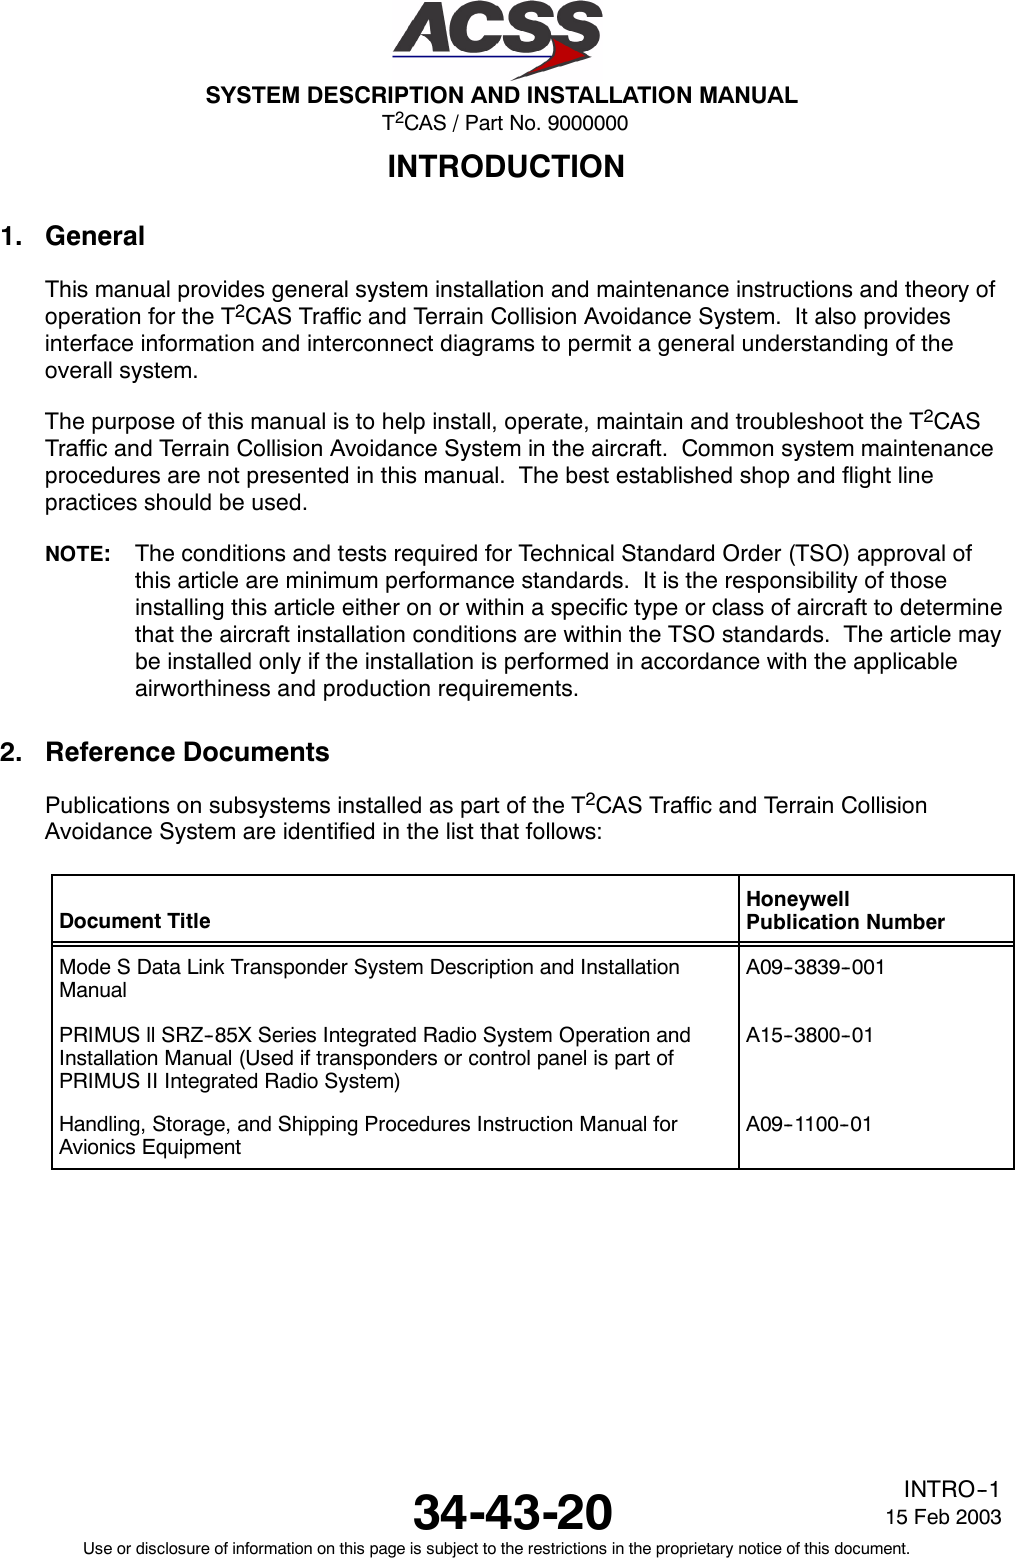 T2CAS / Part No. 9000000SYSTEM DESCRIPTION AND INSTALLATION MANUAL34-43-20 15 Feb 2003Use or disclosure of information on this page is subject to the restrictions in the proprietary notice of this document.INTRO--1INTRODUCTION1. GeneralThis manual provides general system installation and maintenance instructions and theory ofoperation for the T2CAS Traffic and Terrain Collision Avoidance System. It also providesinterface information and interconnect diagrams to permit a general understanding of theoverall system.The purpose of this manual is to help install, operate, maintain and troubleshoot the T2CASTraffic and Terrain Collision Avoidance System in the aircraft. Common system maintenanceprocedures are not presented in this manual. The best established shop and flight linepractices should be used.NOTE:The conditions and tests required for Technical Standard Order (TSO) approval ofthis article are minimum performance standards. It is the responsibility of thoseinstalling this article either on or within a specific type or class of aircraft to determinethat the aircraft installation conditions are within the TSO standards. The article maybe installed only if the installation is performed in accordance with the applicableairworthiness and production requirements.2. Reference DocumentsPublications on subsystems installed as part of the T2CAS Traffic and Terrain CollisionAvoidance System are identified in the list that follows:Document TitleHoneywellPublication NumberMode S Data Link Transponder System Description and InstallationManualA09--3839--001PRIMUS ll SRZ--85X Series Integrated Radio System Operation andInstallation Manual (Used if transponders or control panel is part ofPRIMUS II Integrated Radio System)A15--3800--01Handling, Storage, and Shipping Procedures Instruction Manual forAvionics EquipmentA09--1100--01